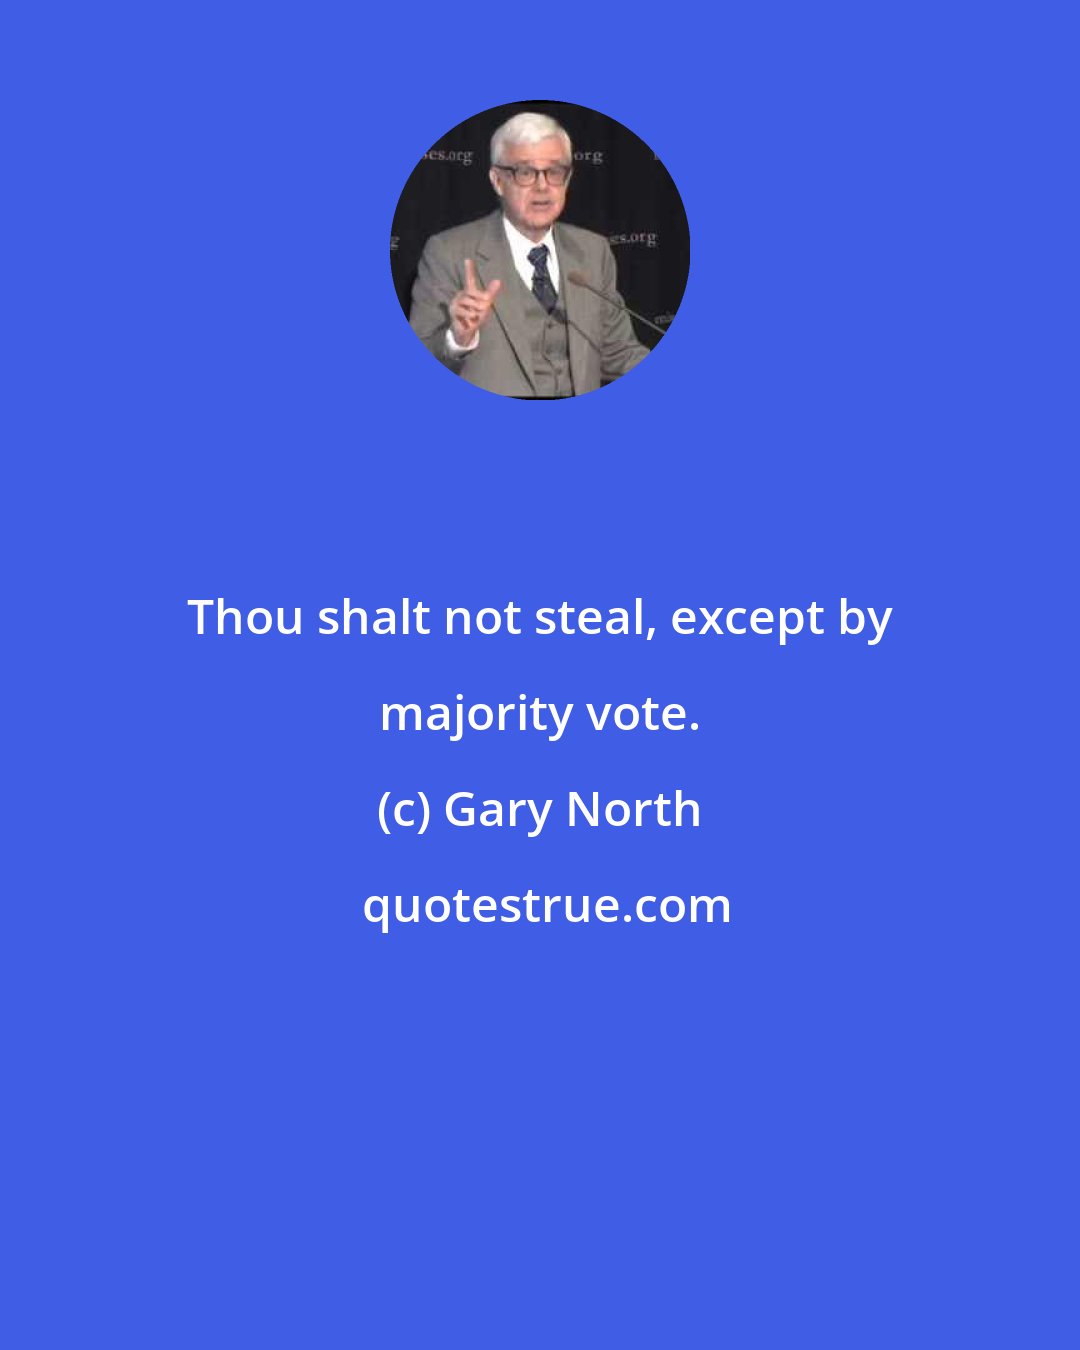 Gary North: Thou shalt not steal, except by majority vote.